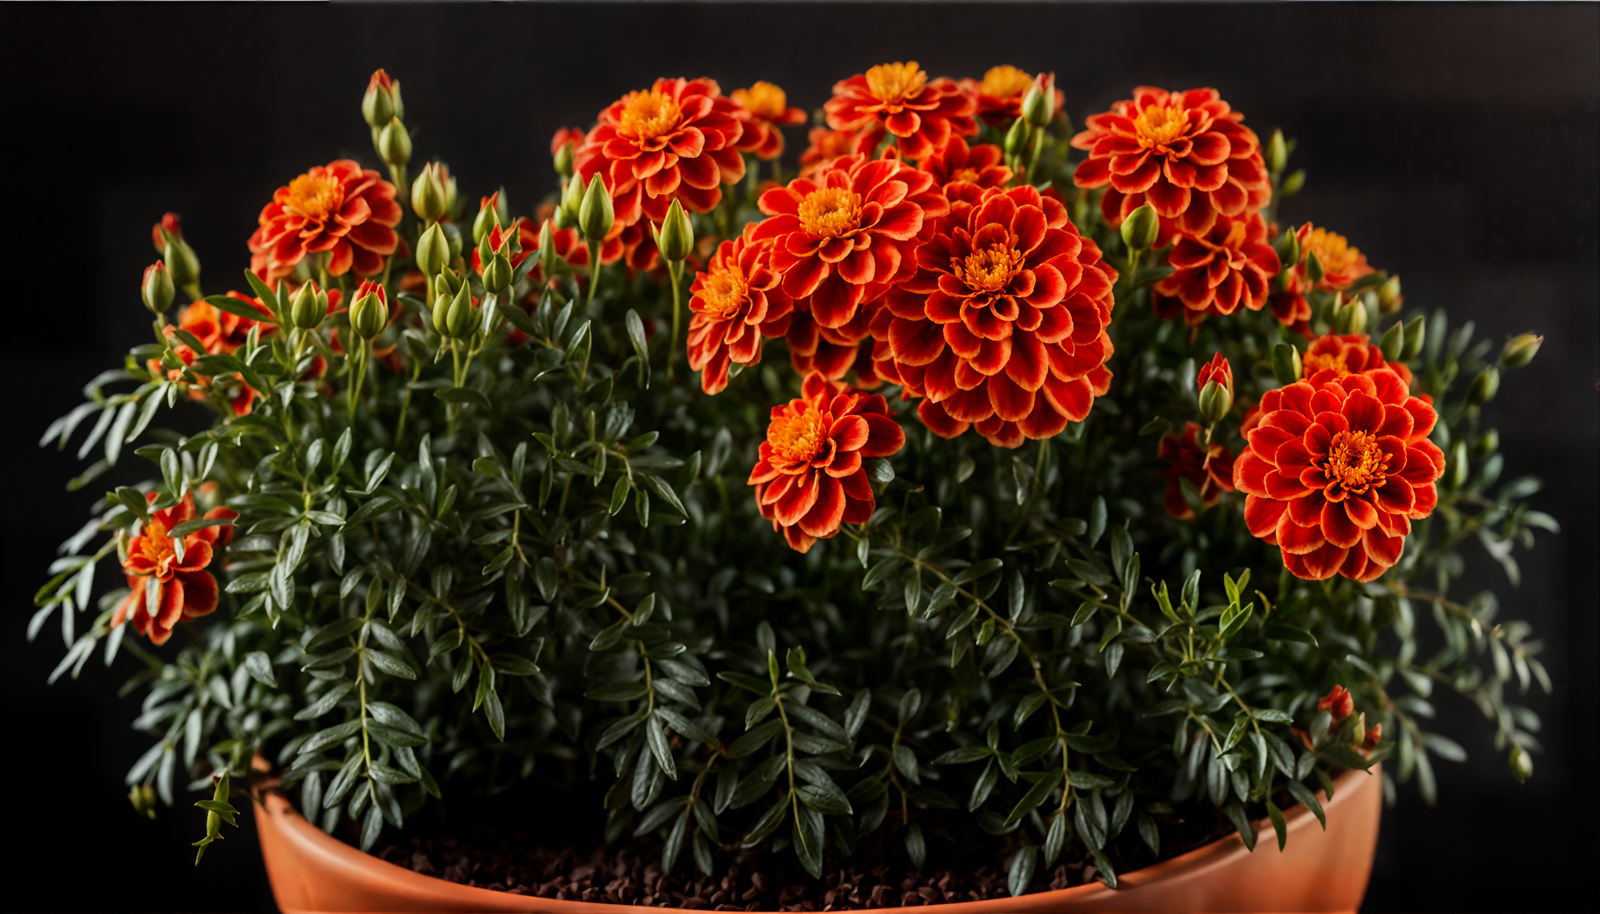 Vibrant Tagetes erecta flowers in a brown planter, with clear lighting against a dark background.